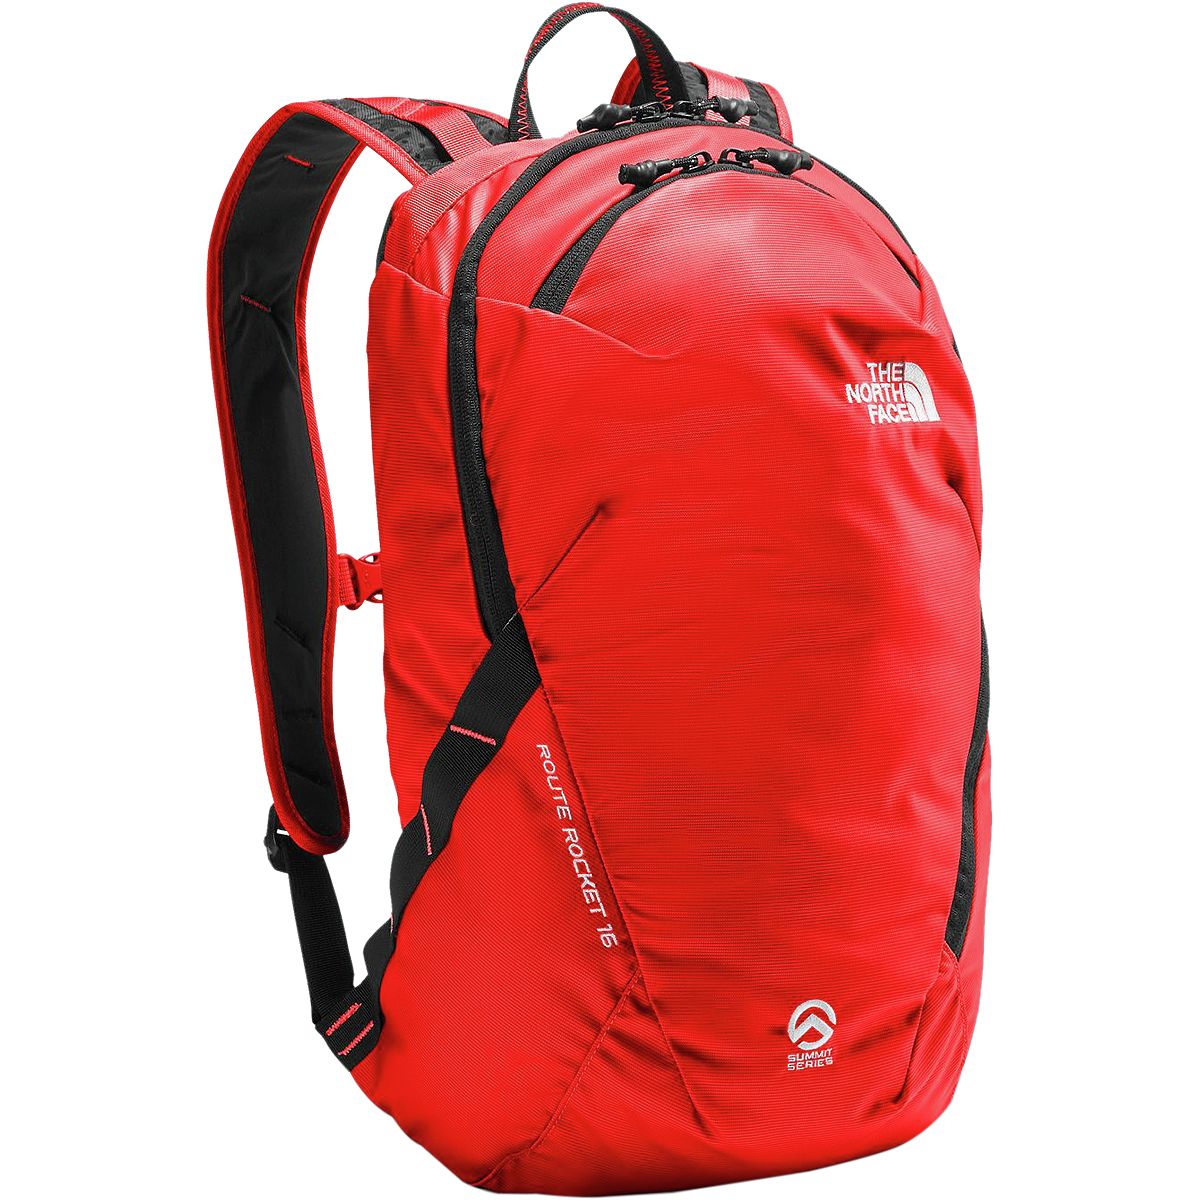 The North Face Route Rocket 16L Backpack | Backcountry.com